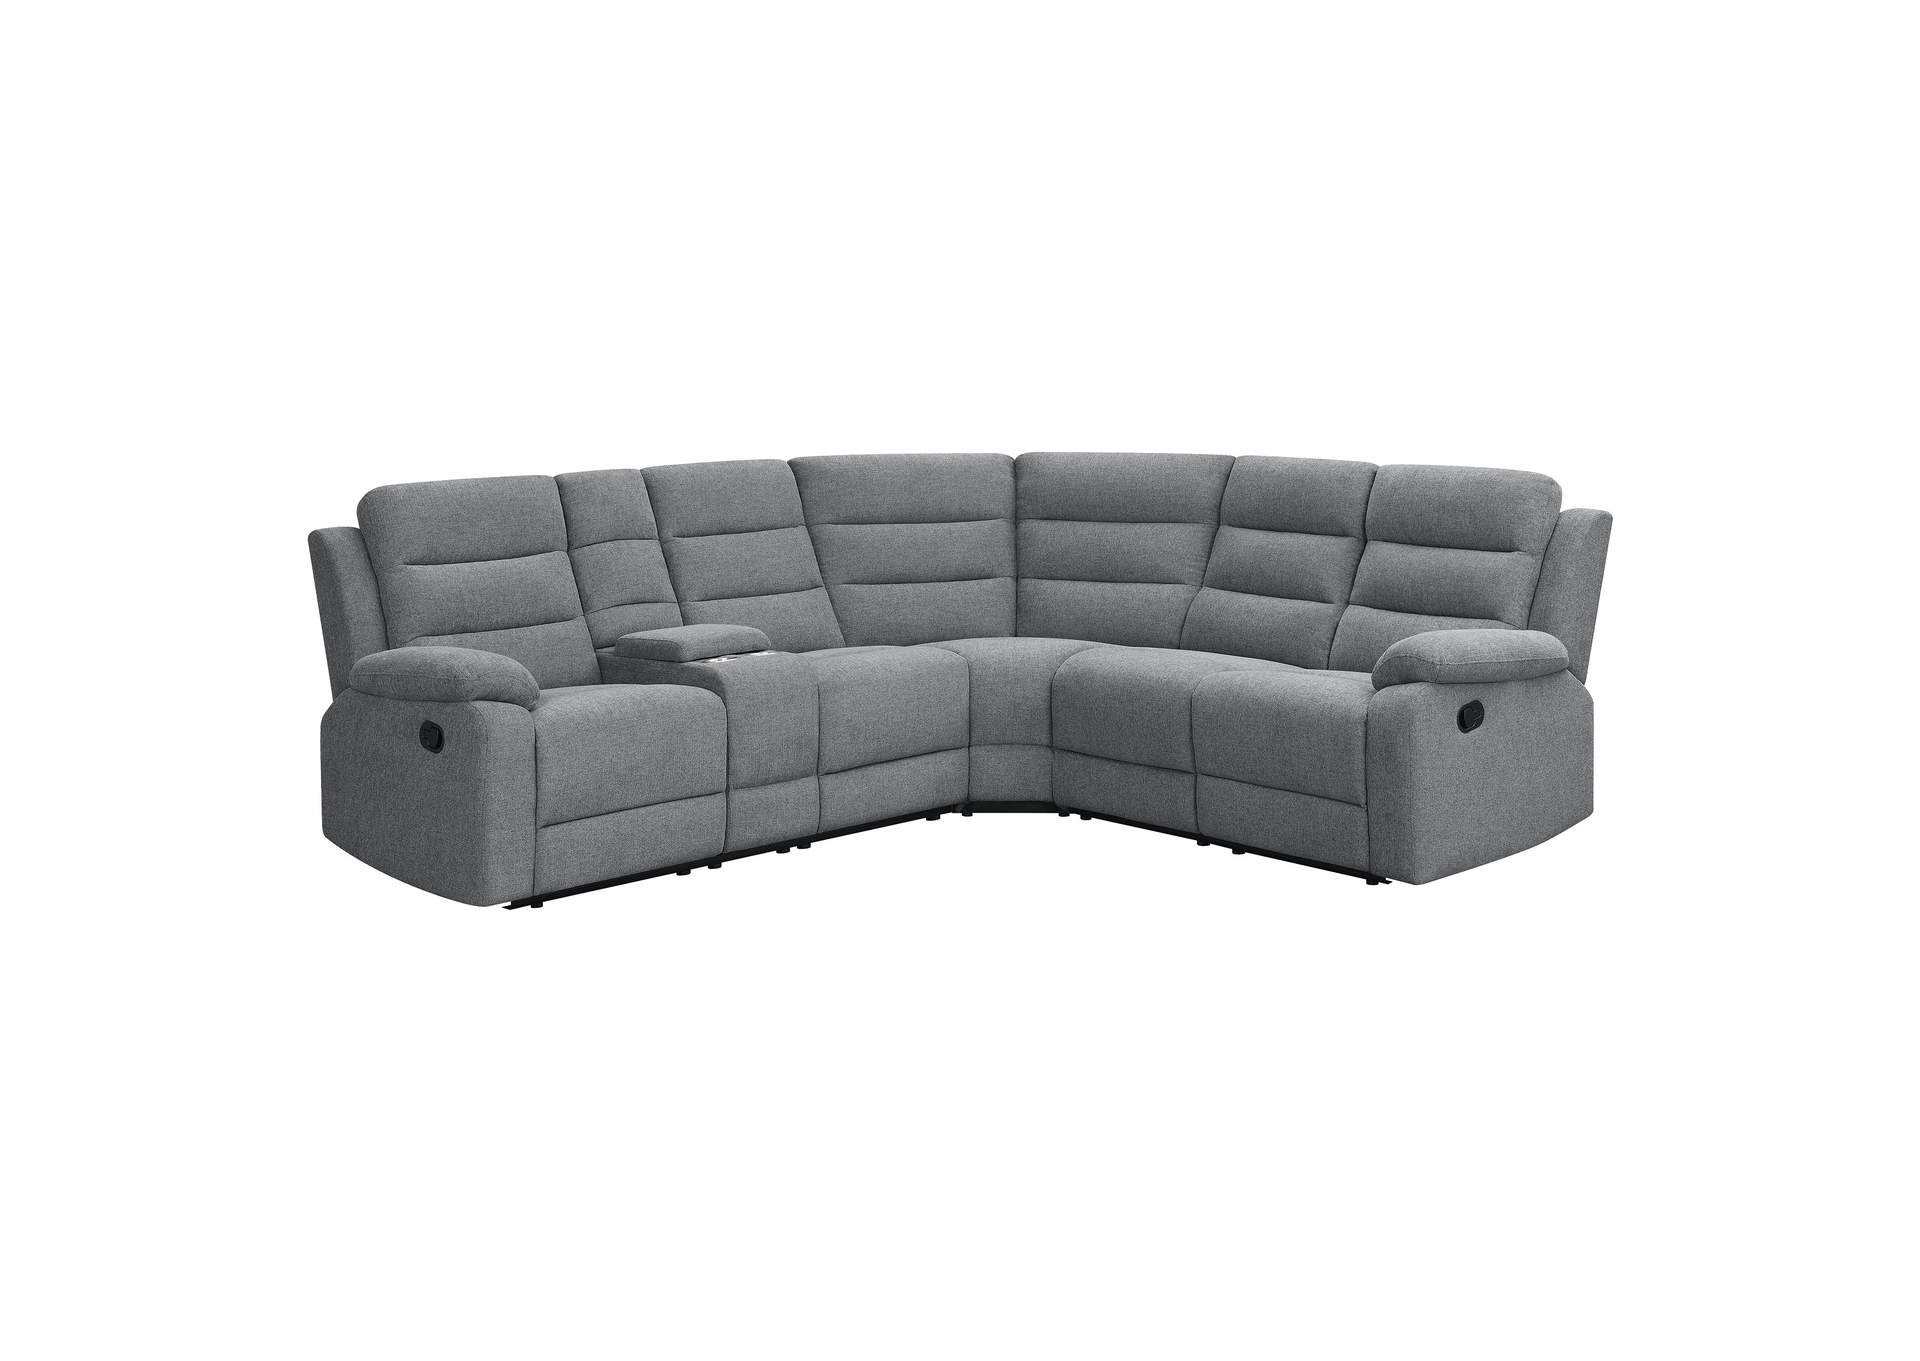 David 3-piece Upholstered Motion Sectional with Pillow Arms Smoke,Coaster Furniture